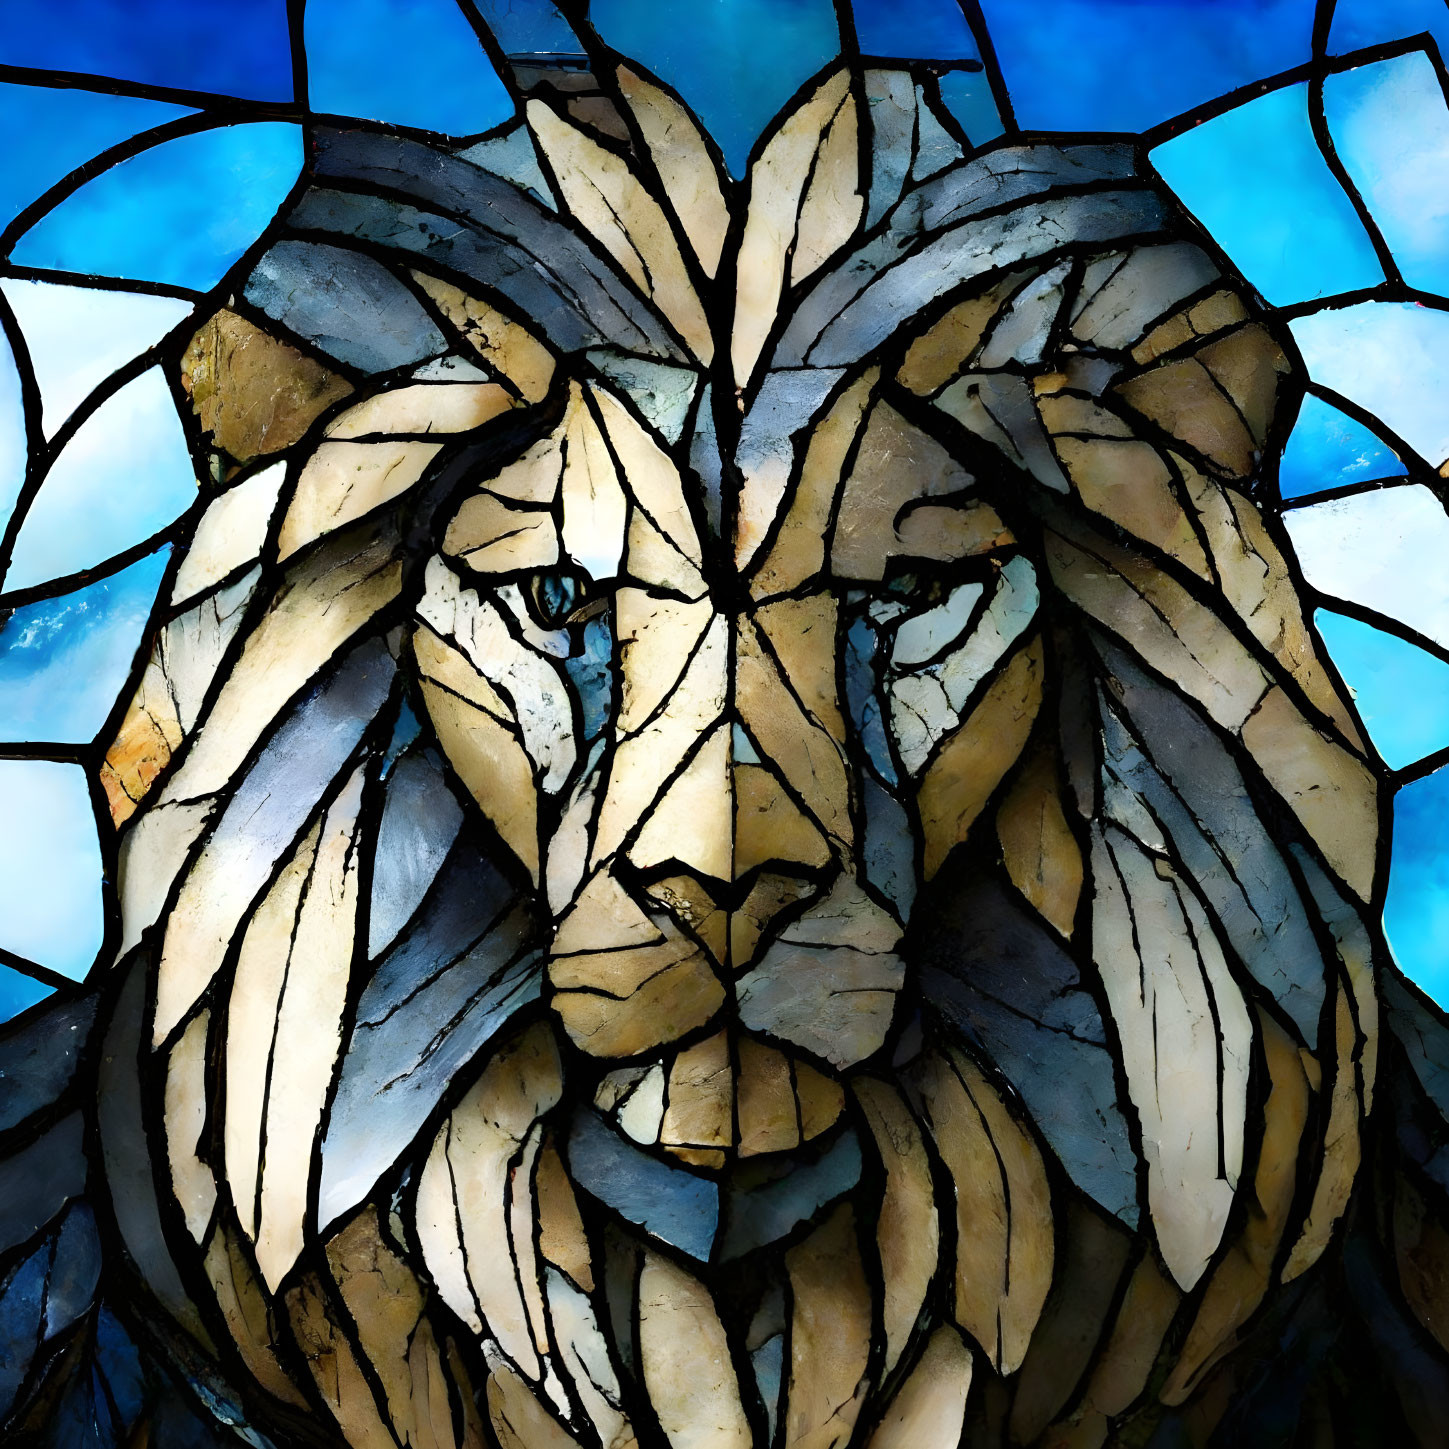 Vibrant lion's head stained glass art in blue and gold hues